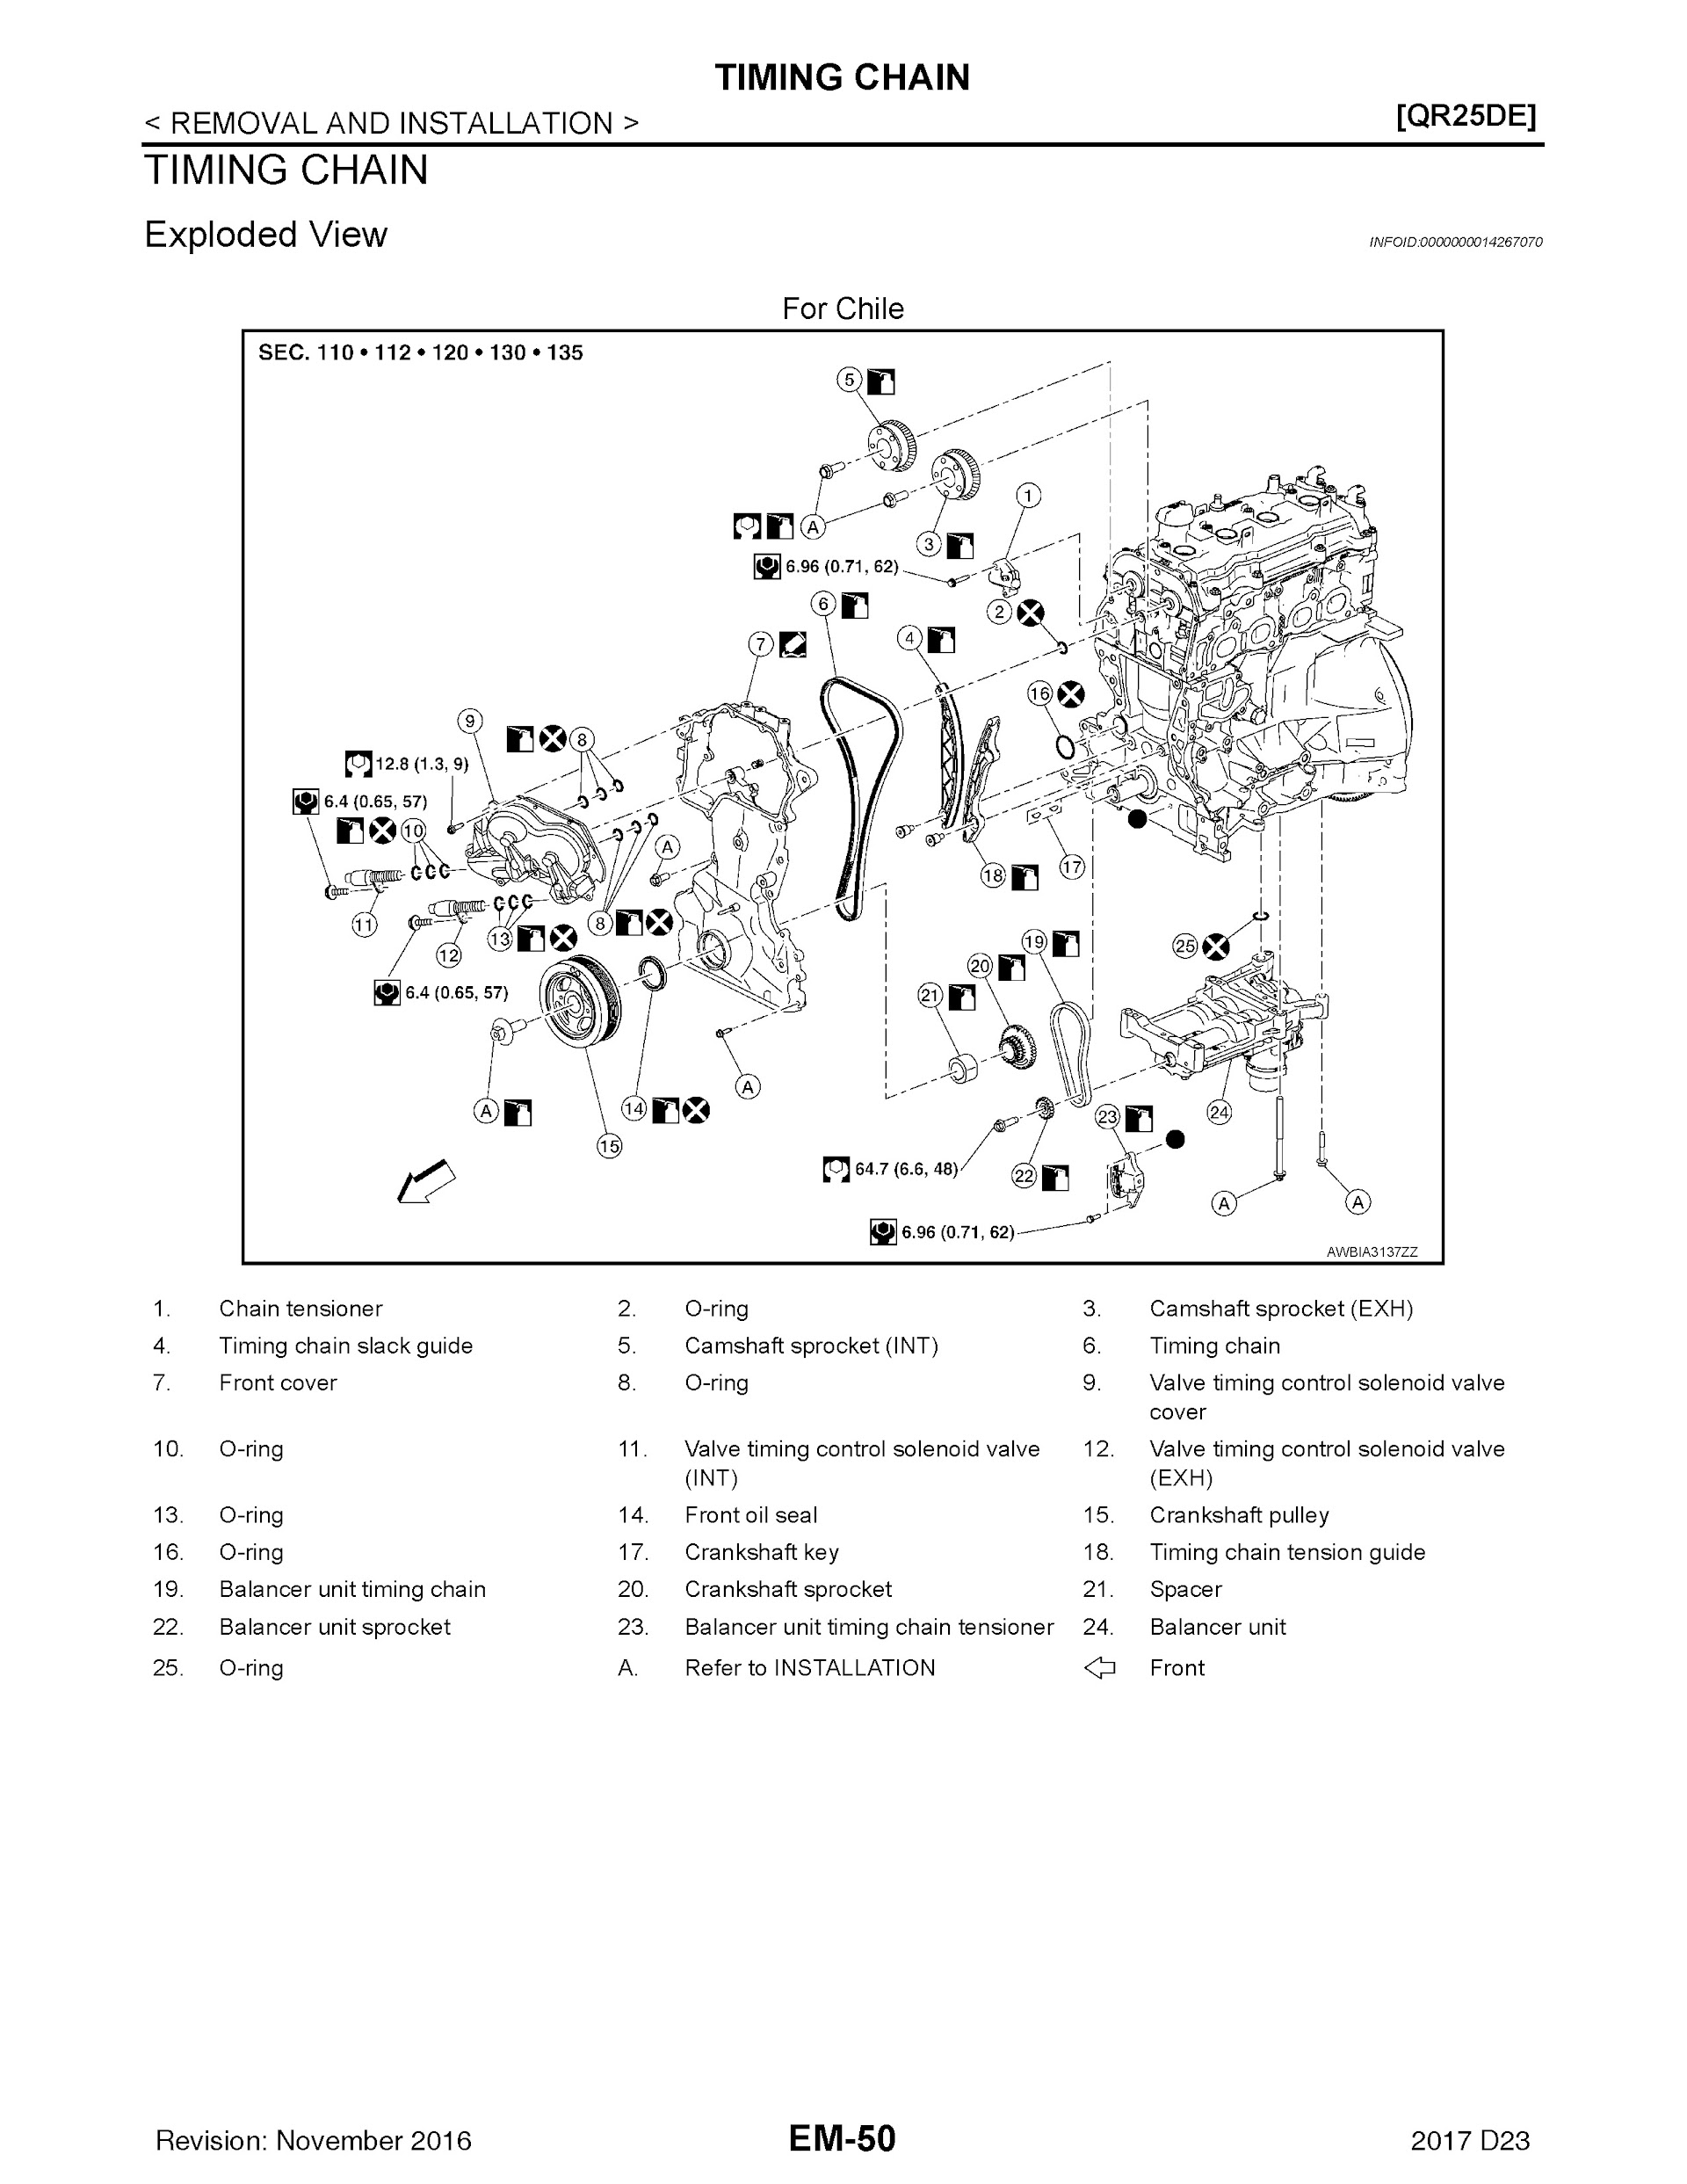 2015-2020 Nissan Frontier repair manual, Timing Chain Removal and Installation